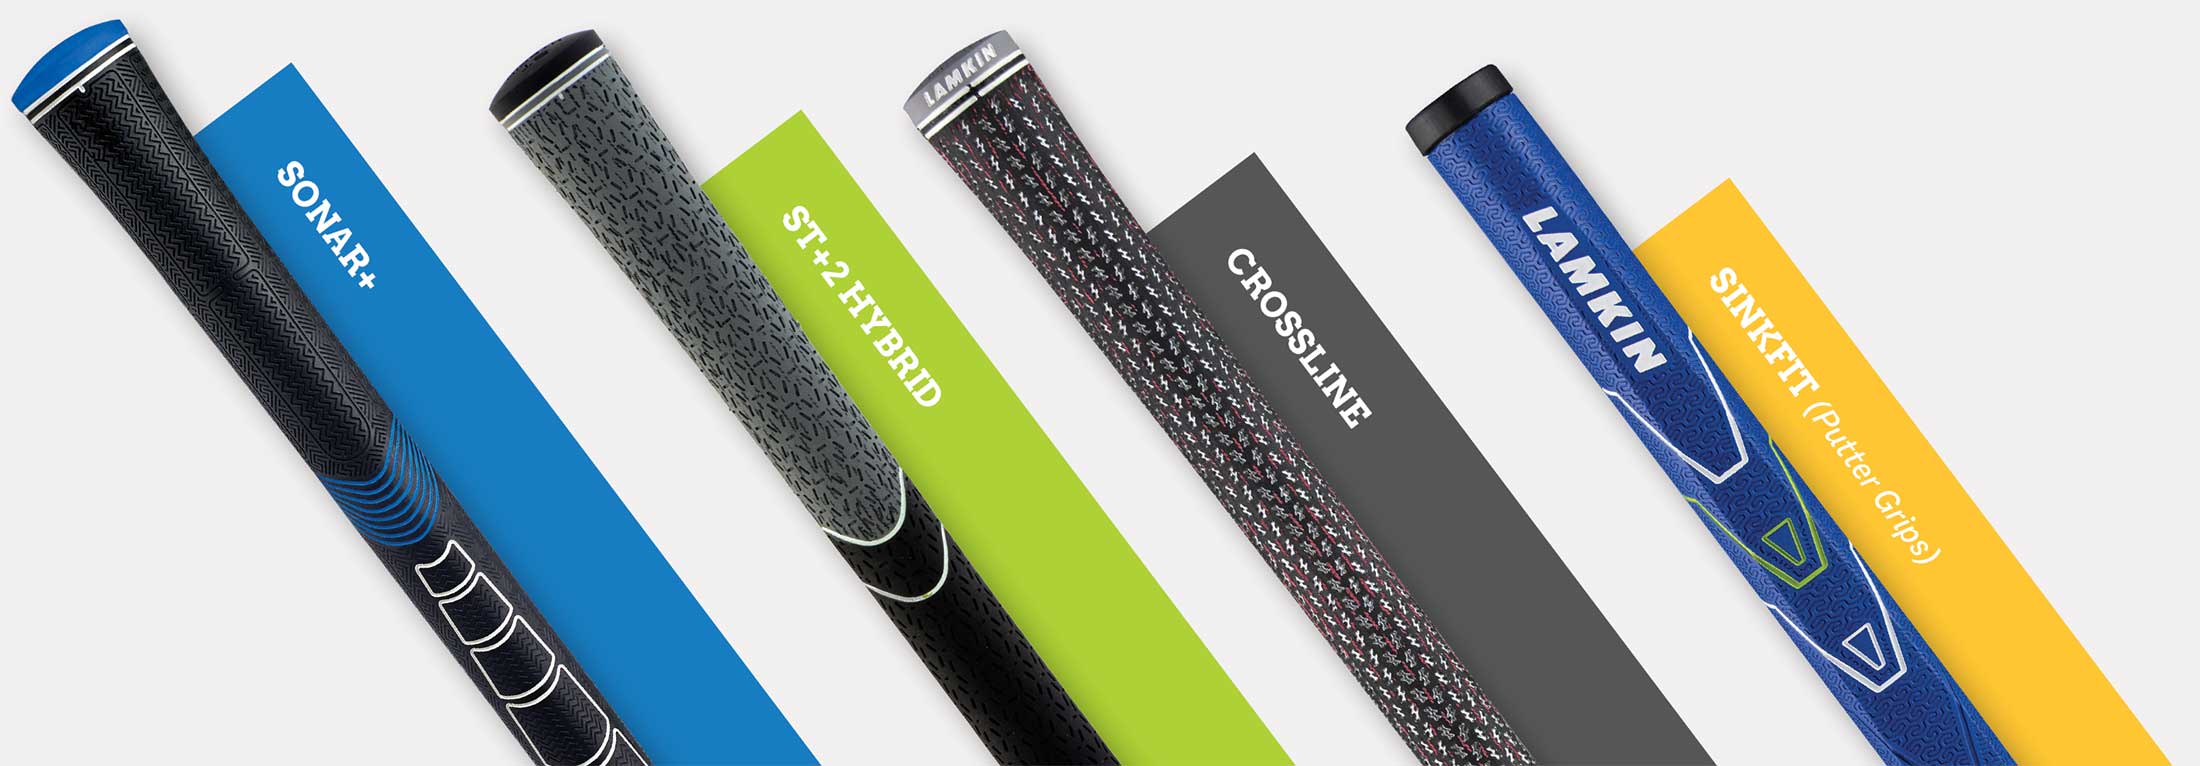 Lamkin Golf Grips - The Best Golf Grips for Your Game